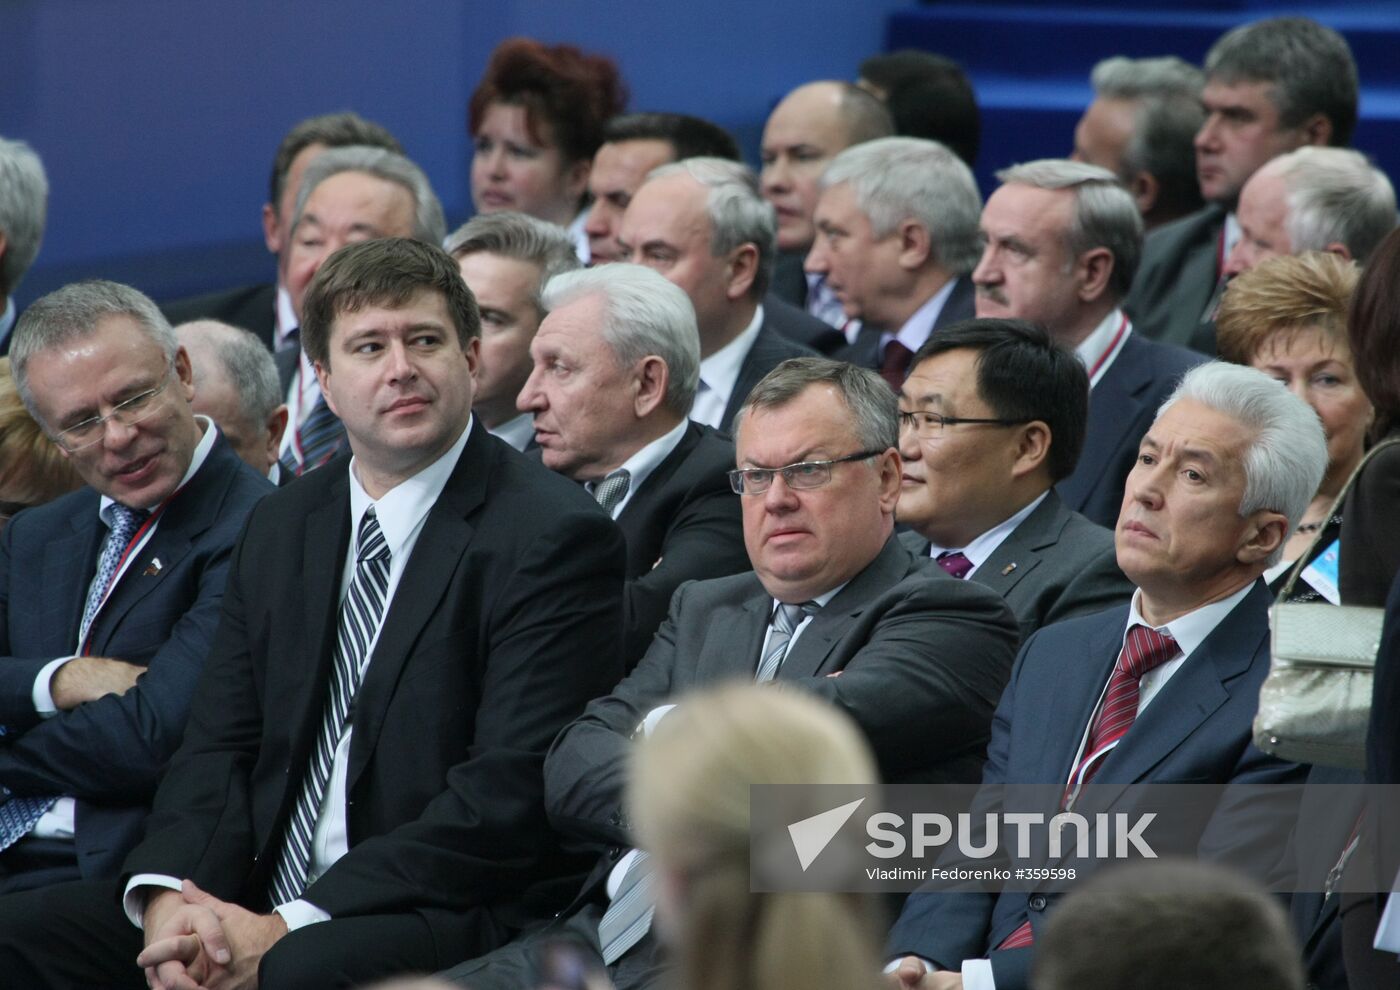 10th meeting of United Russia Party